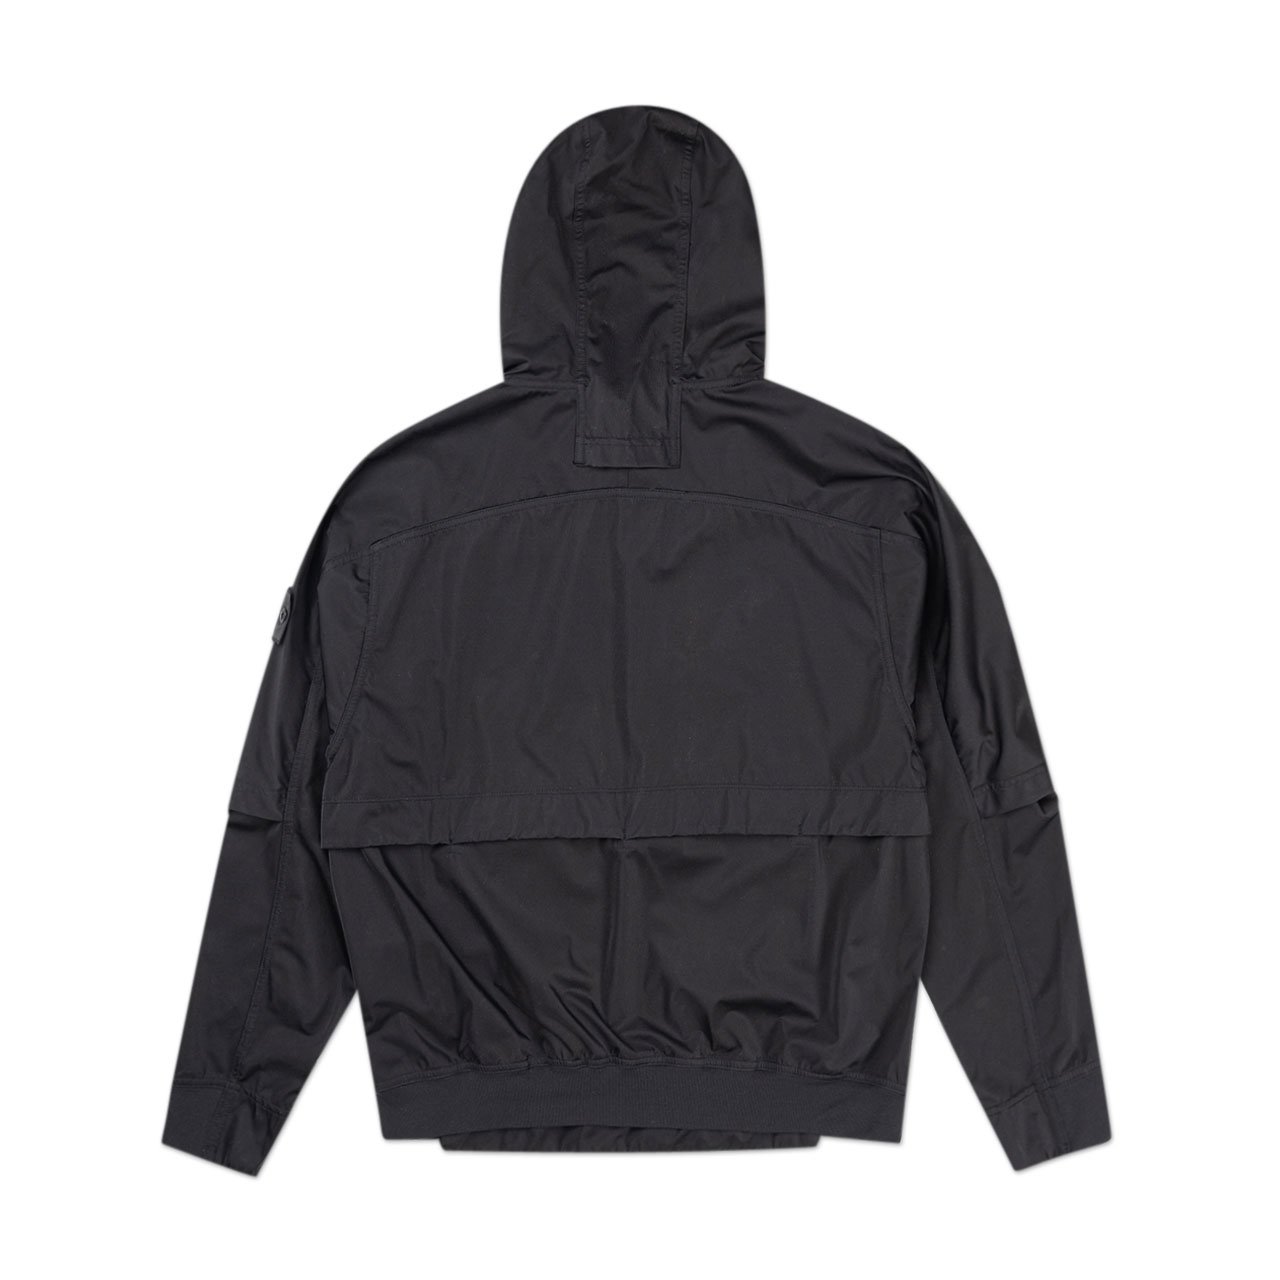 stone island shadow project packable anorak (black) 721940504.V0029 - a.plus